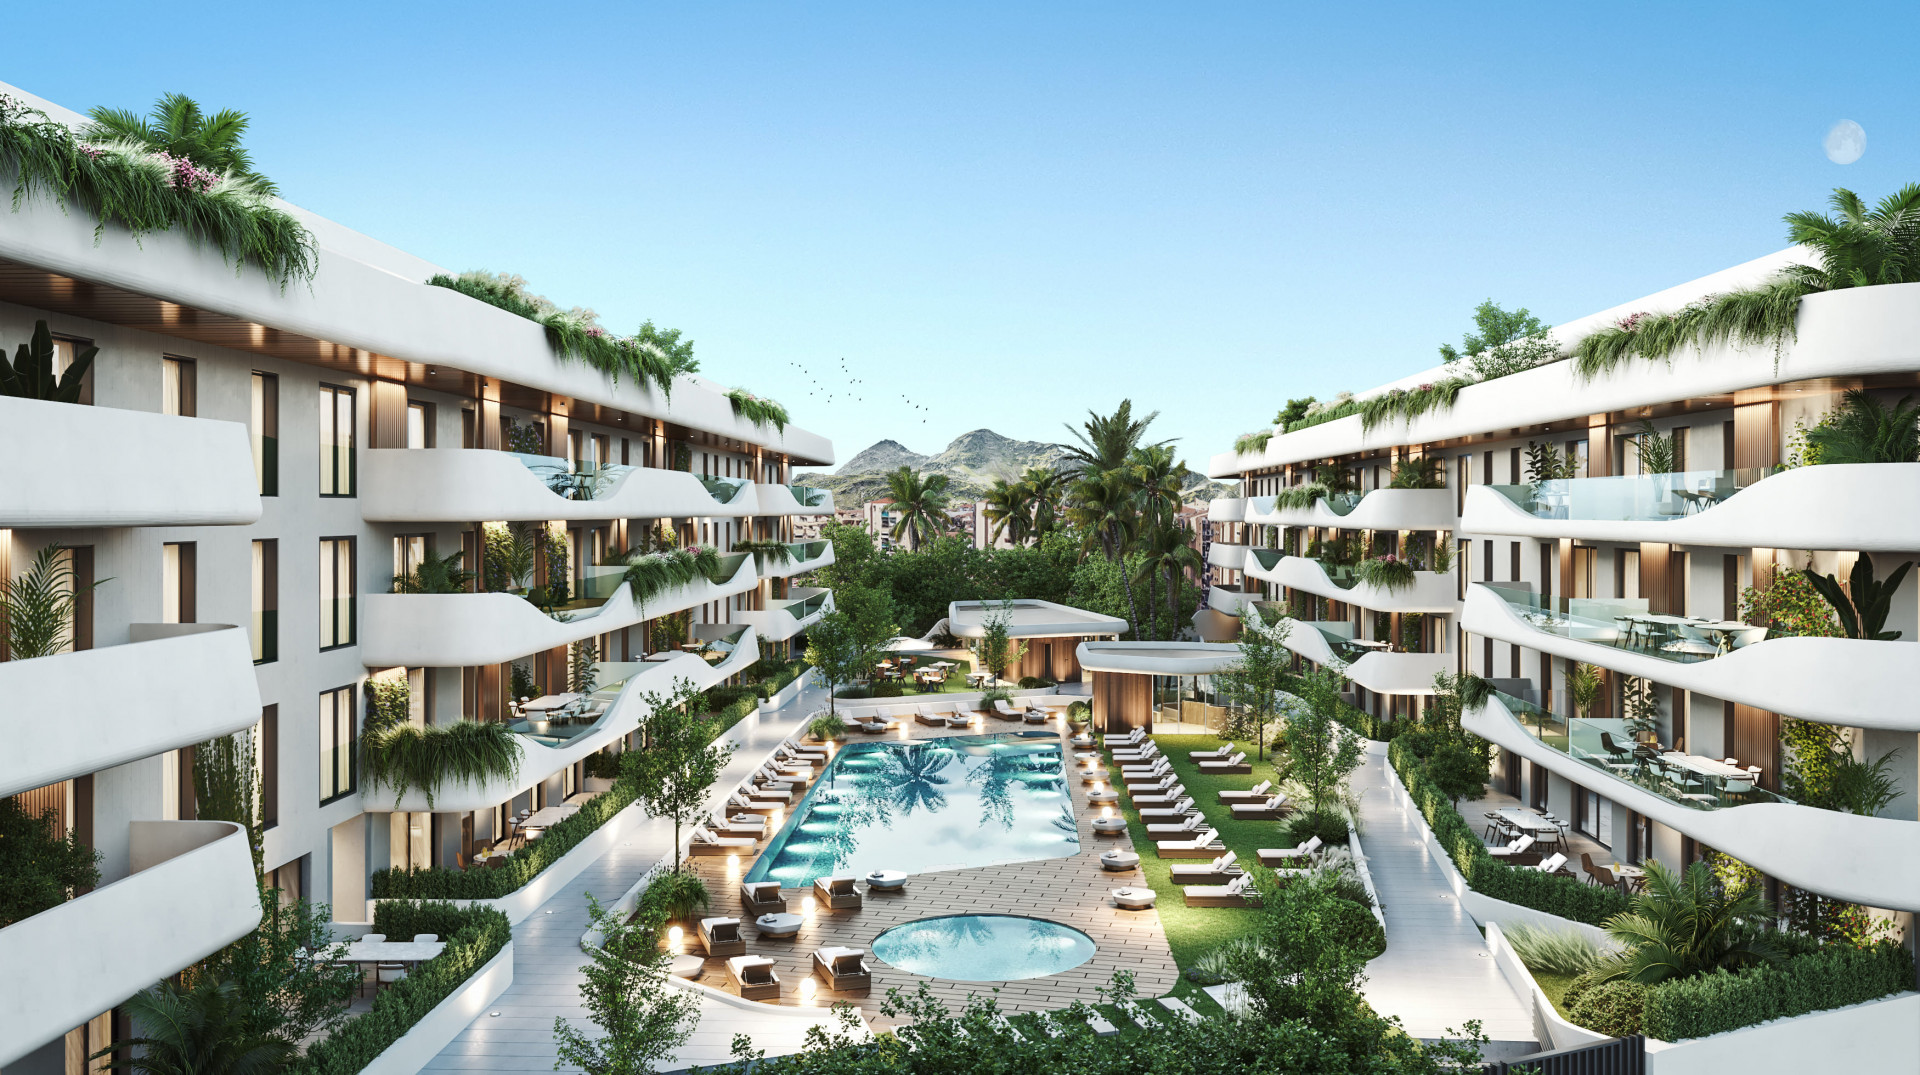 Salvia: Two to four bedroom homes in one of the most sought after areas of the Costa del Sol.